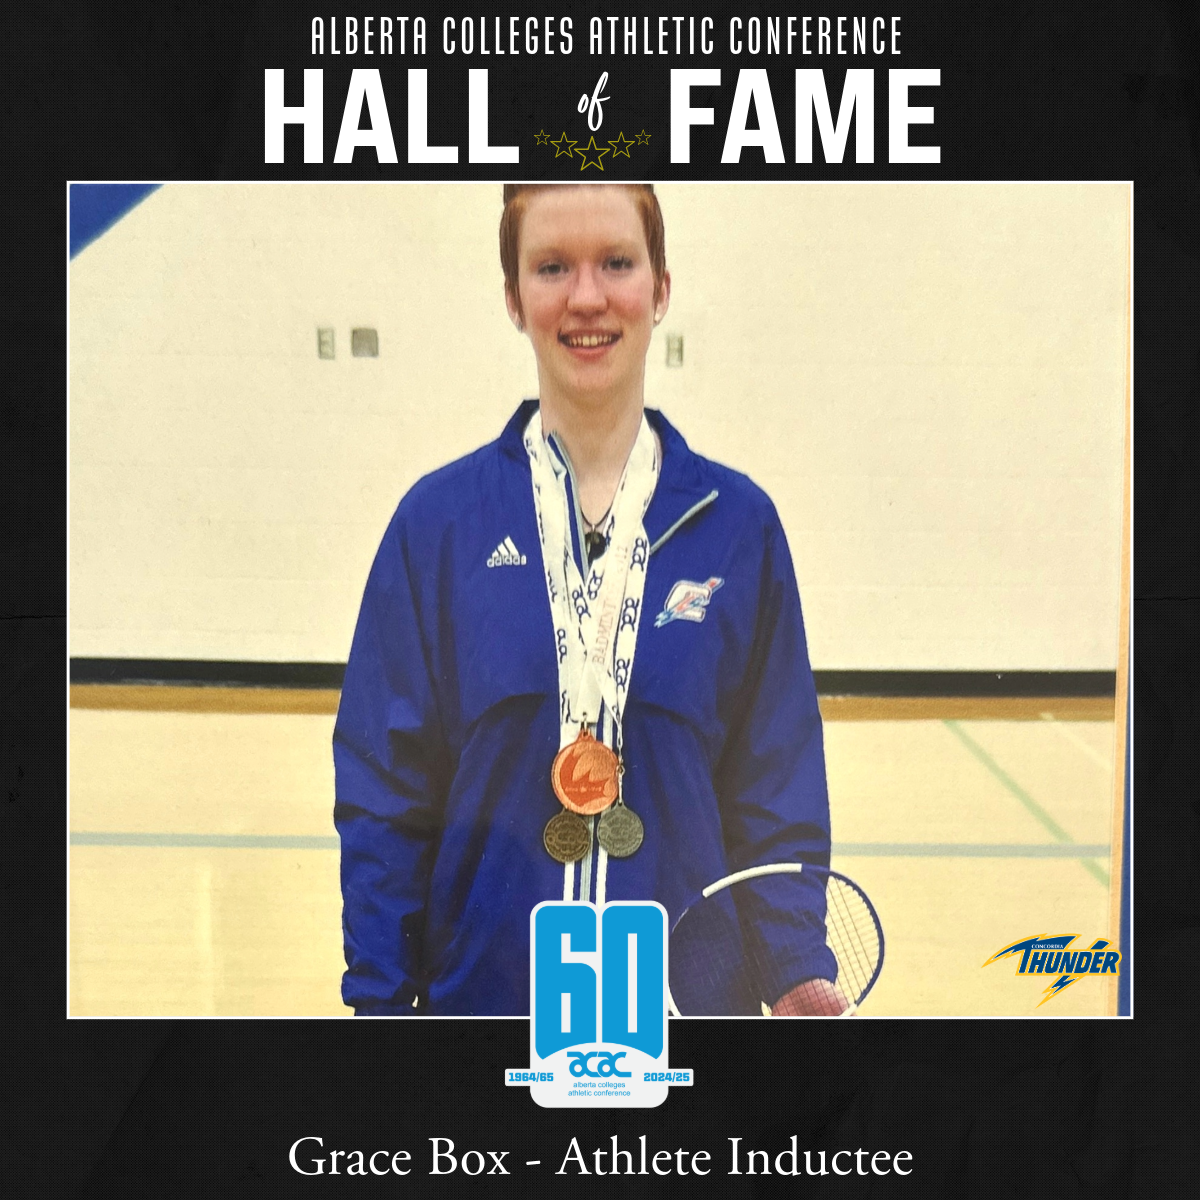 ACAC Hall of Fame Athlete Inductee: Grace Box